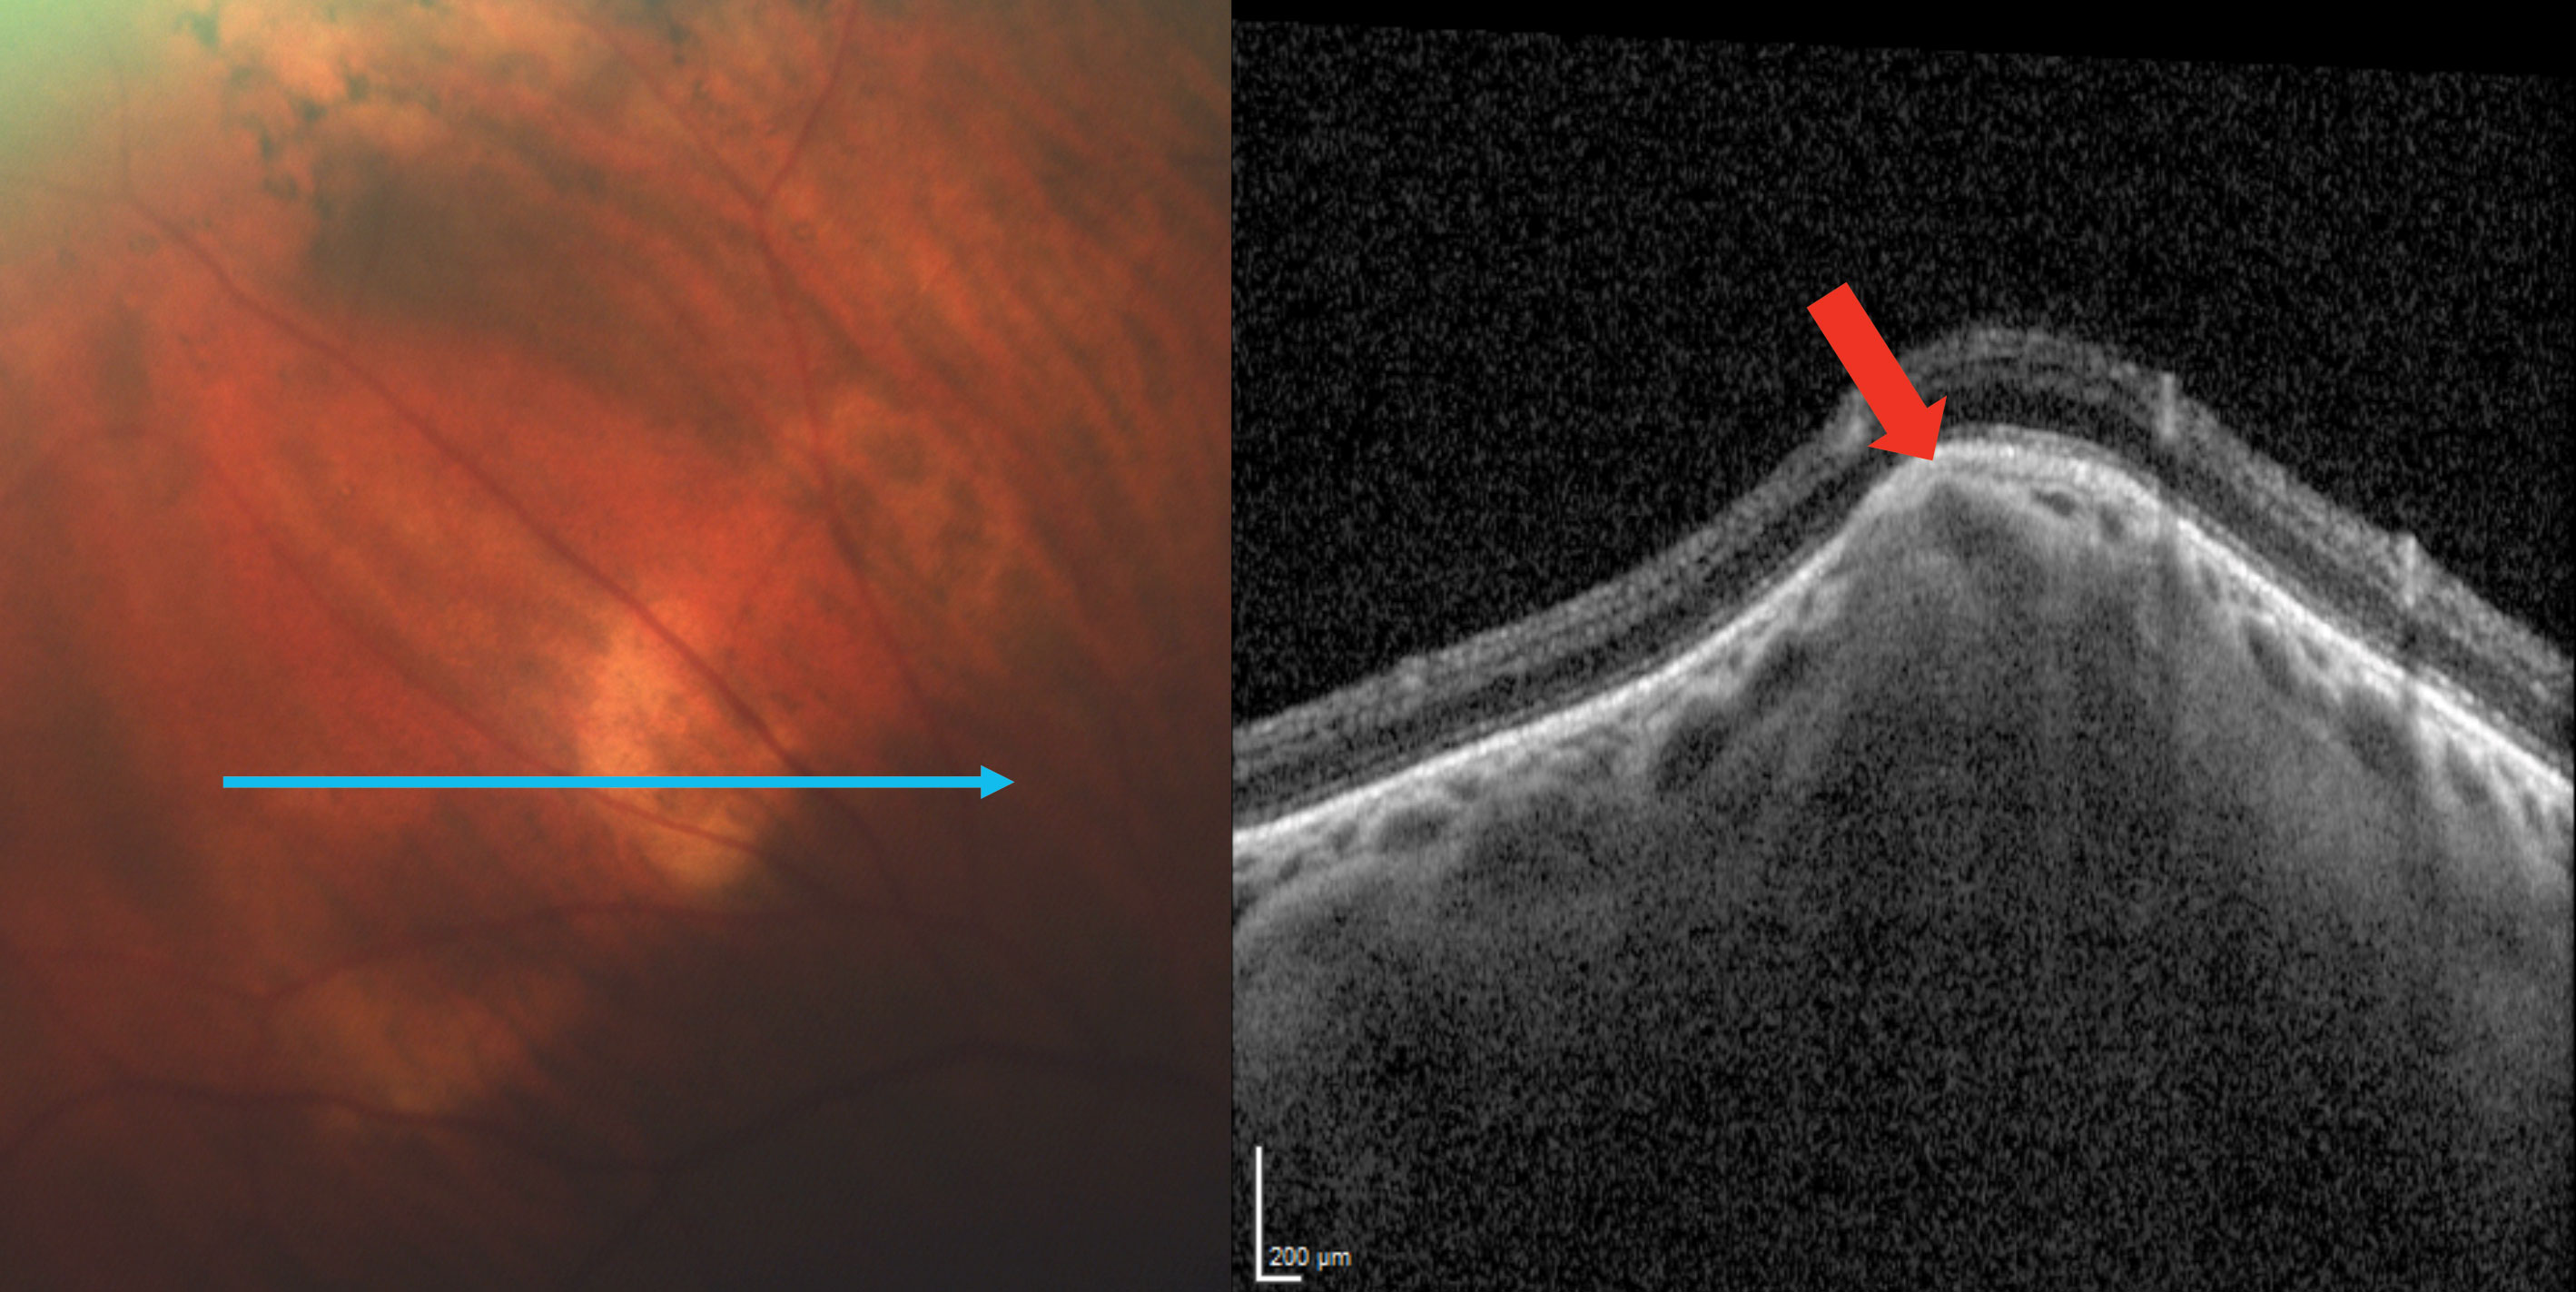 EDI-OCT imaging through the SCC reveals a Type 2 “rolling” lesion. The red arrow points to an area of choroidal thinning above the lesion.